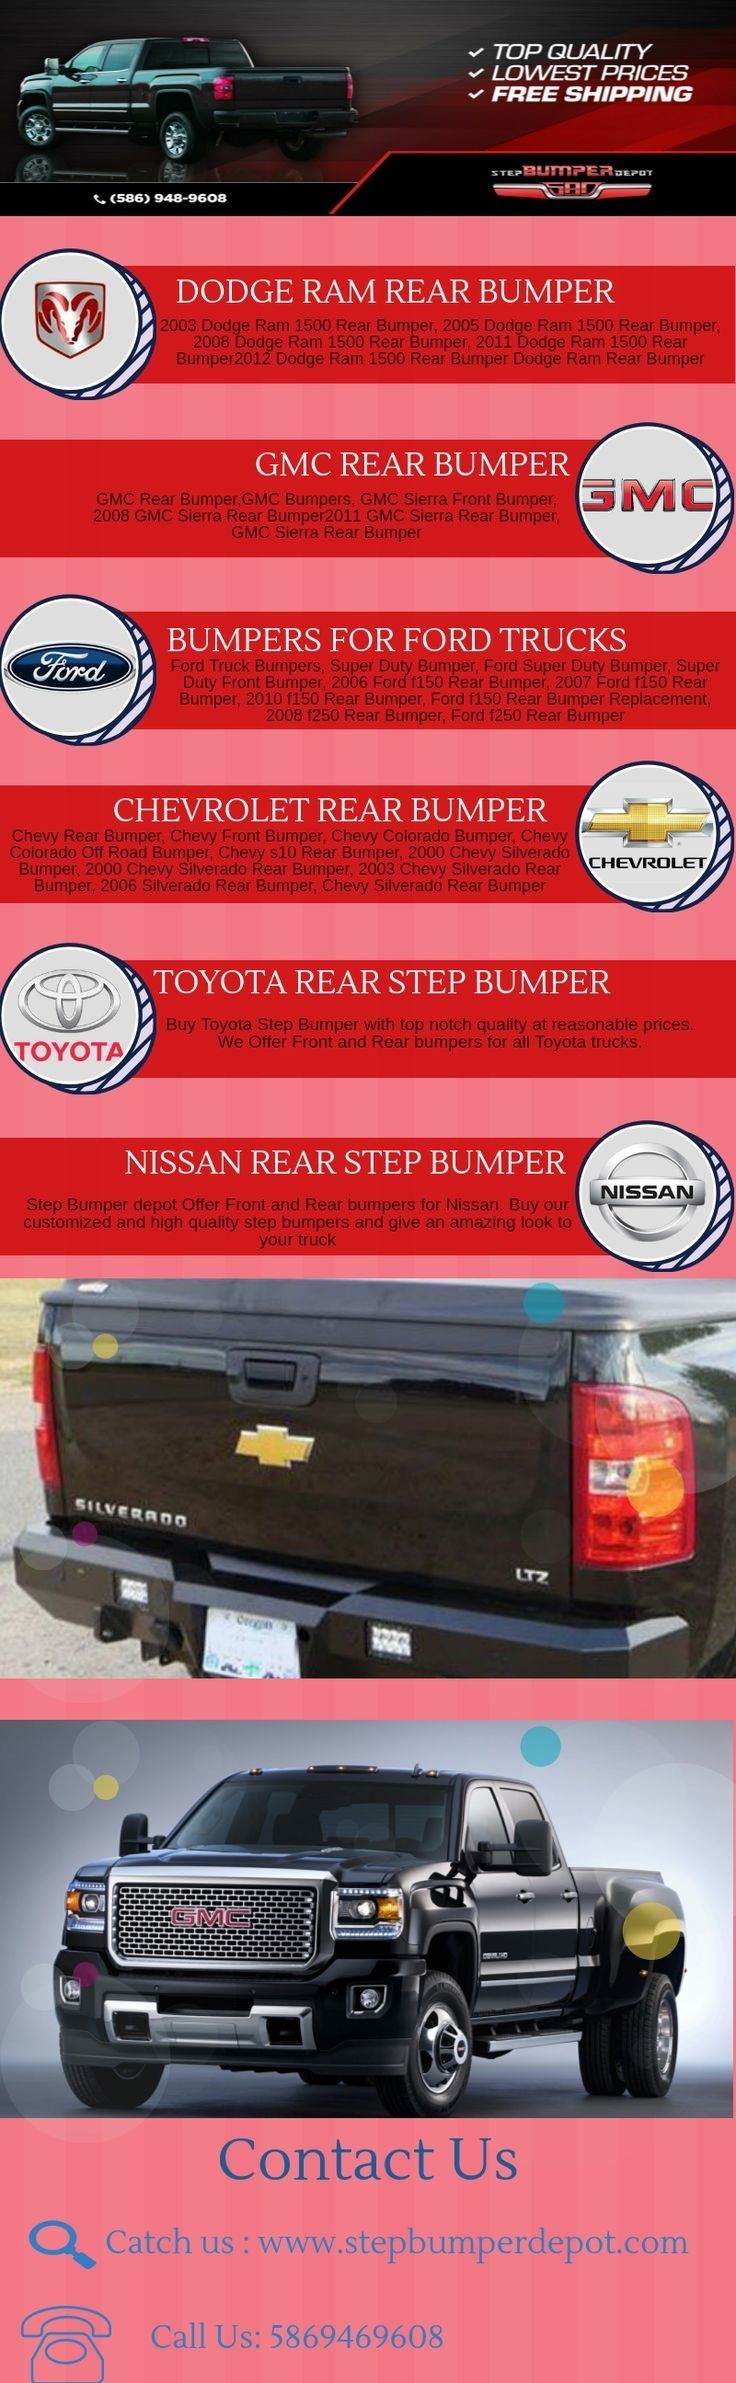 Looking for Step bumpers for your truck Get rear front bumpers step bumpers 41 best Chevy 2003 S10 Tail Lights Best